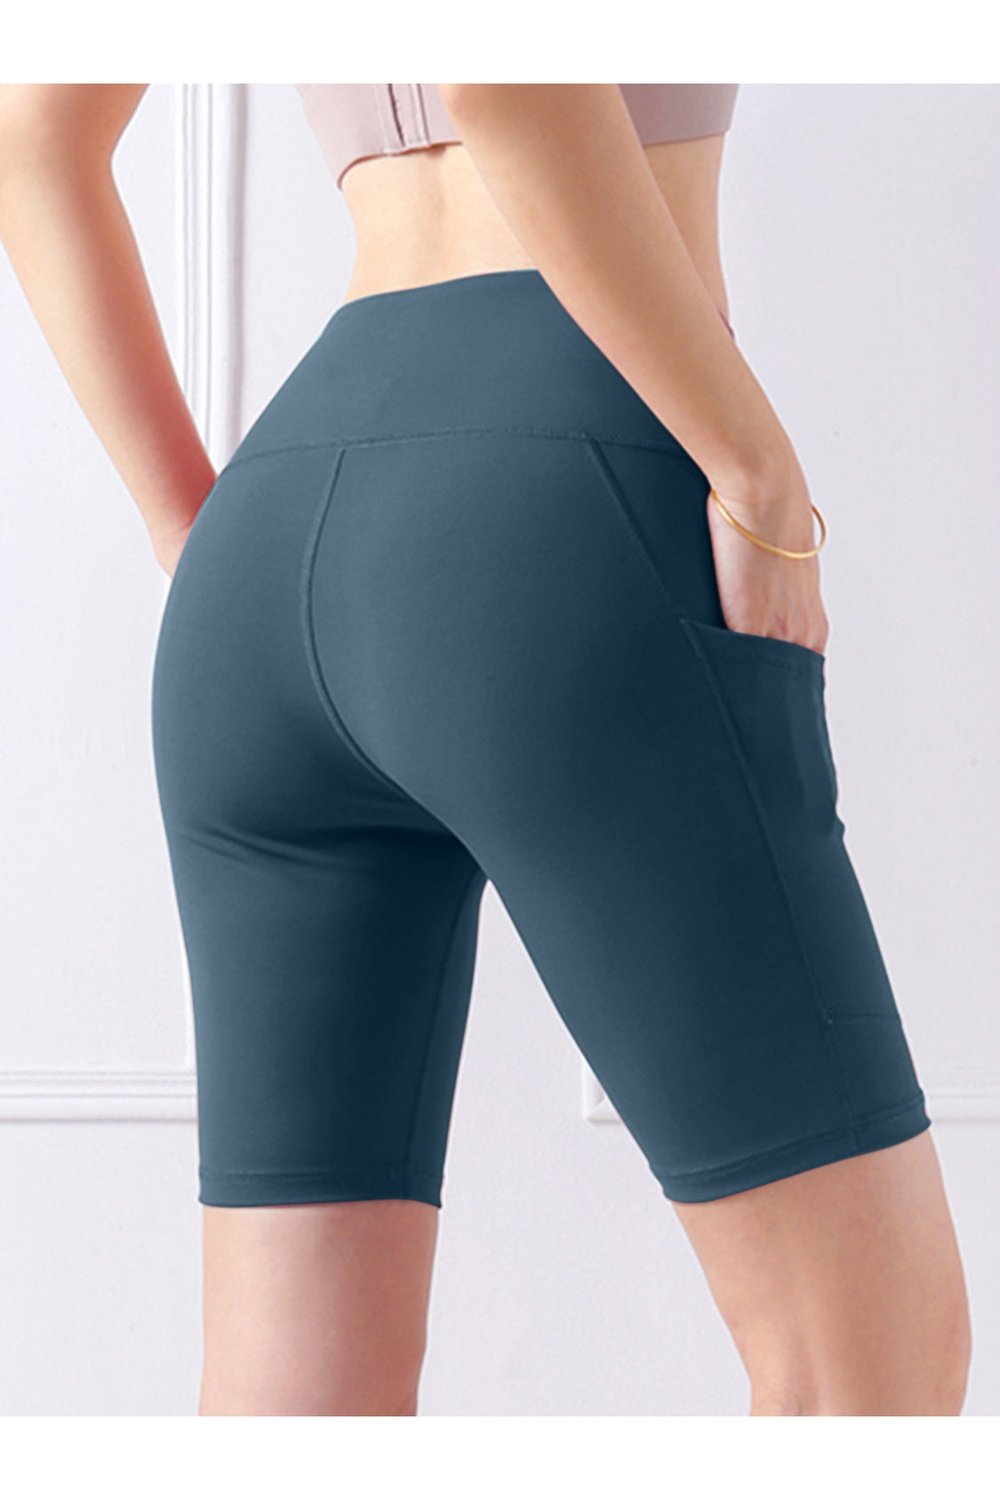 Pocketed High Waist Active Shorts - Short Leggings - FITGGINS